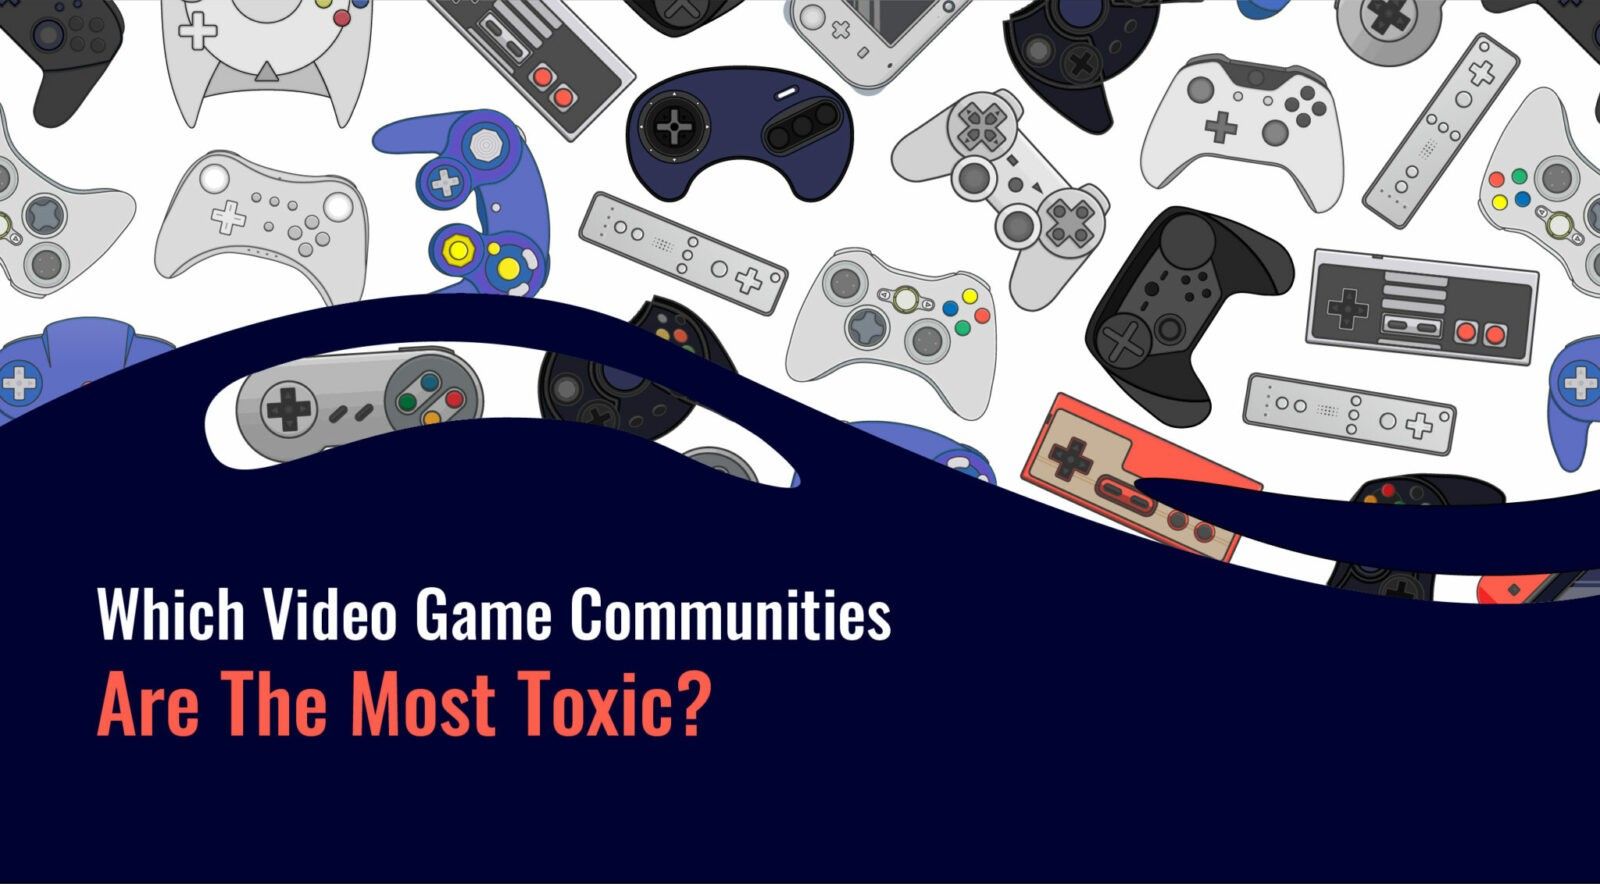 Gaming leaderboards and toxic behavior